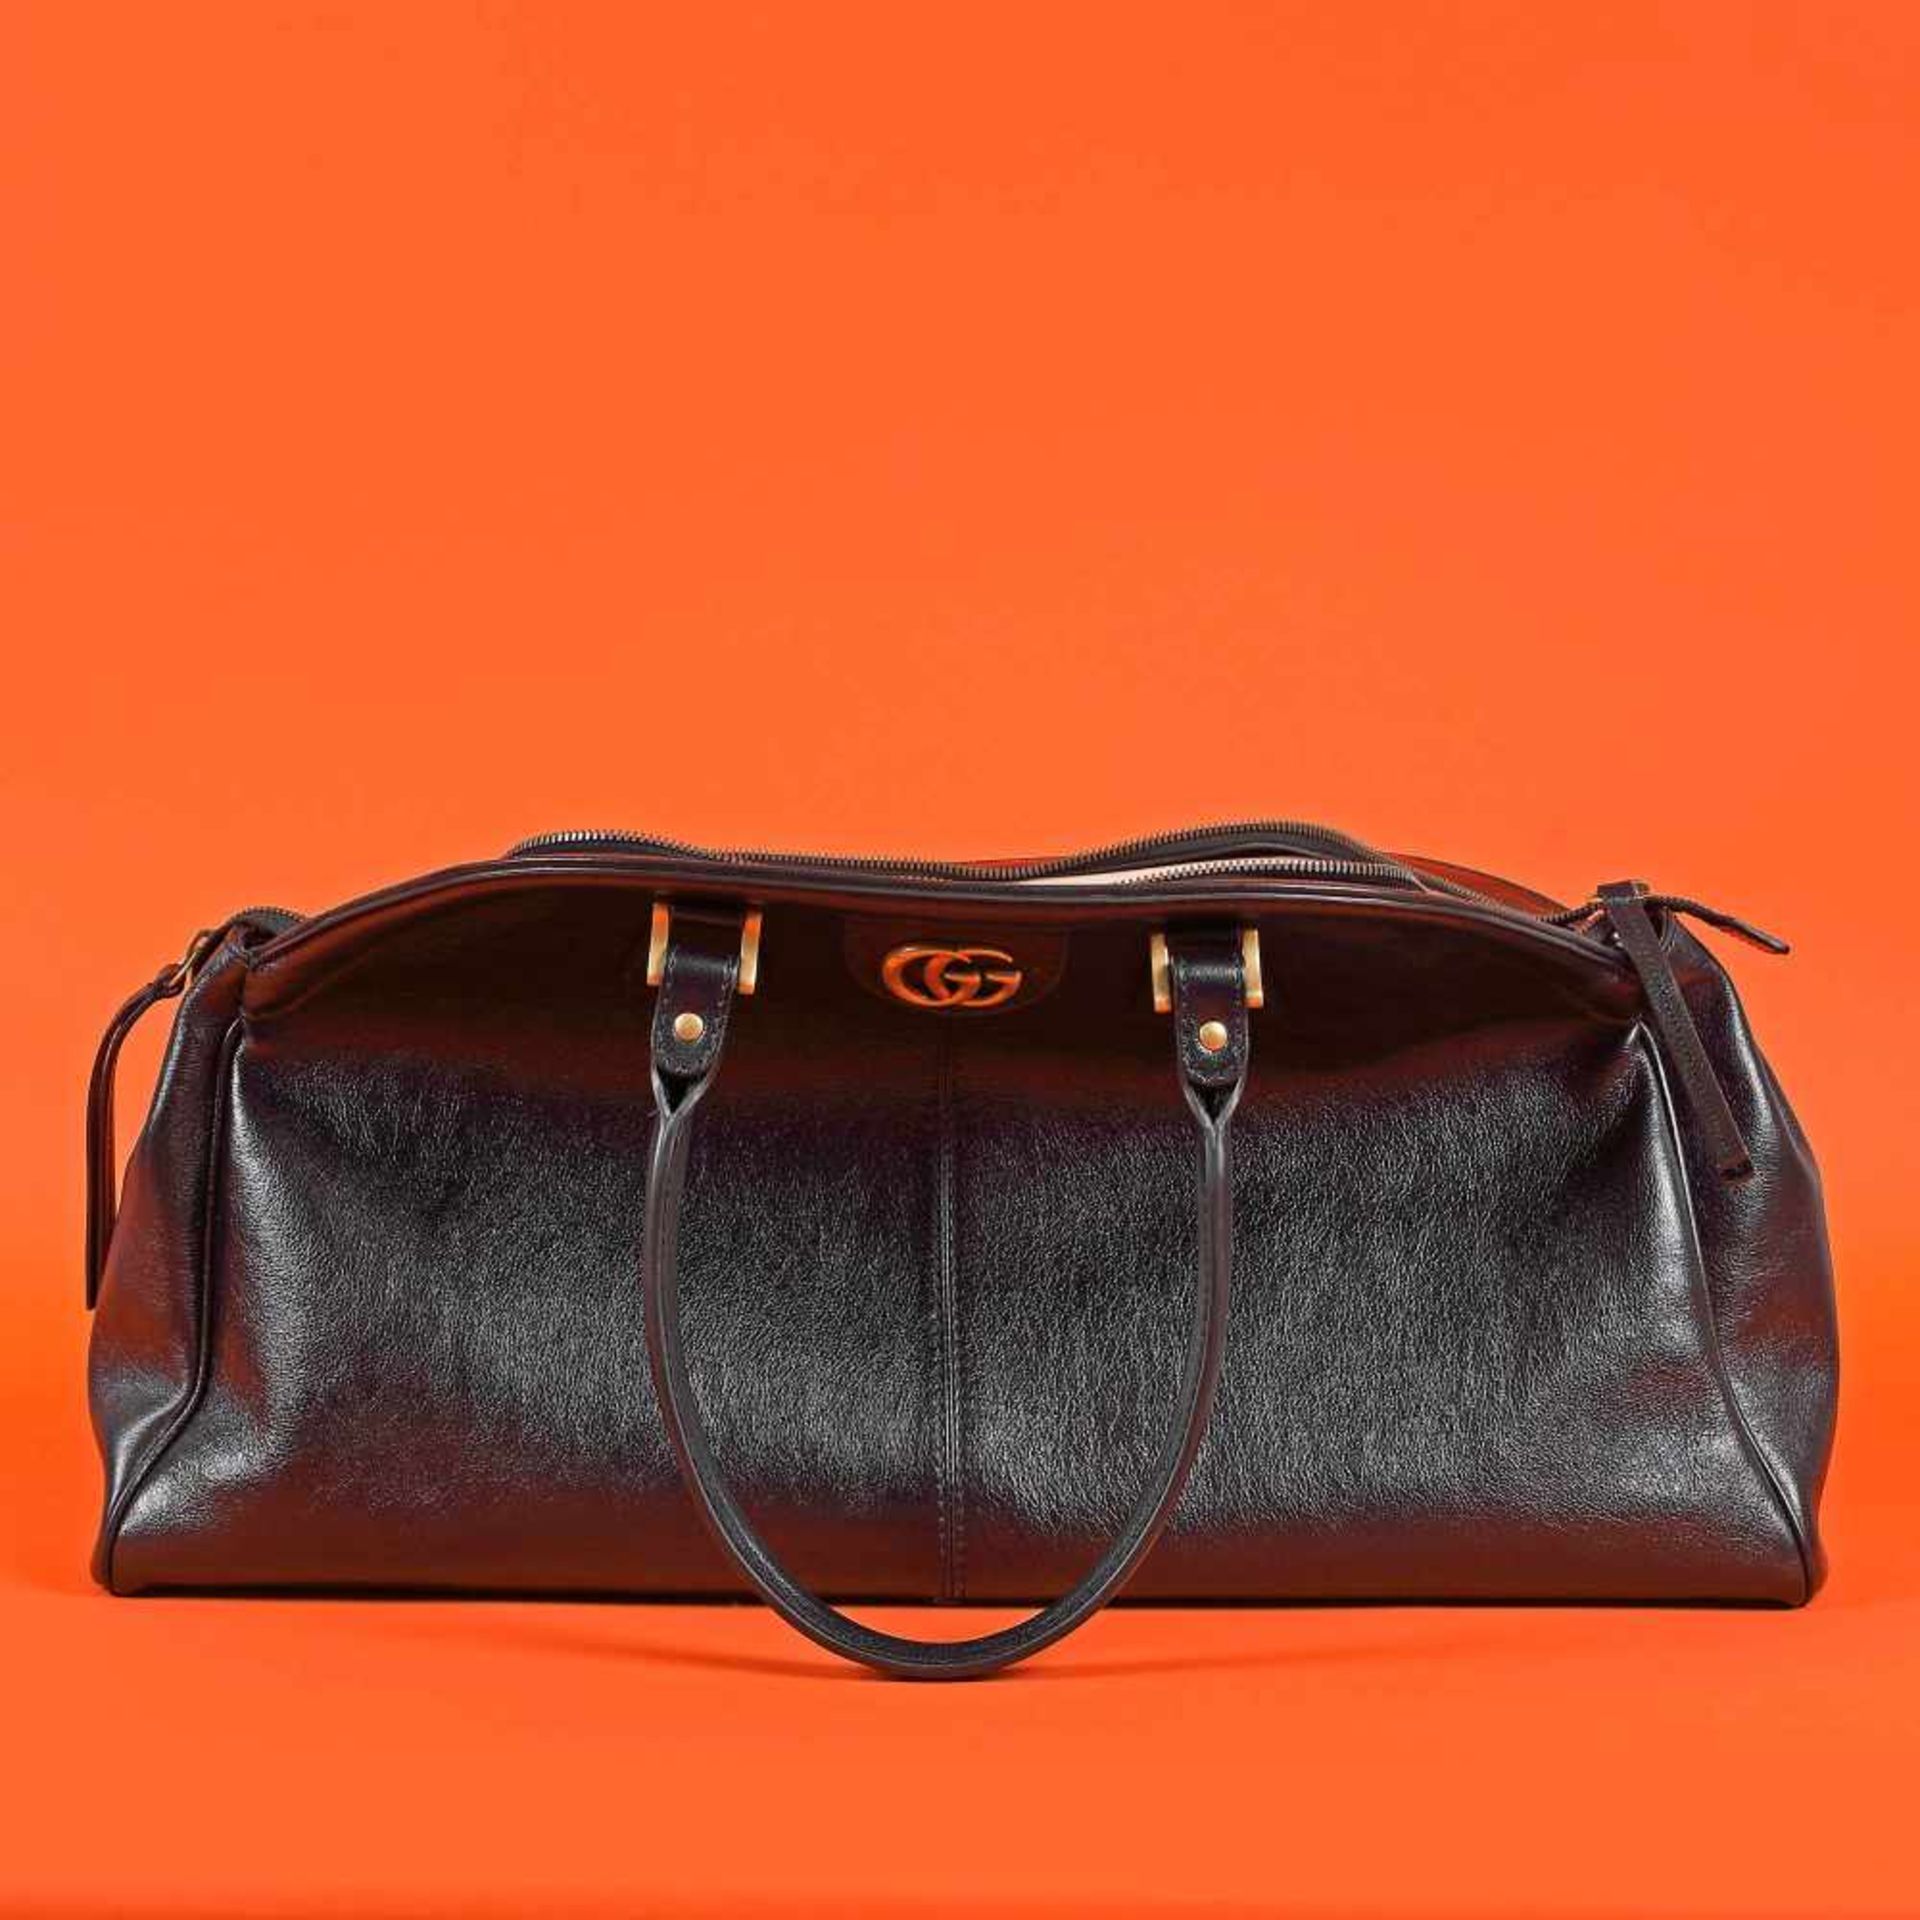 "Re(belle)" - Gucci bag, leather, black, for women, accompanied by user manual and original cover - Image 7 of 7